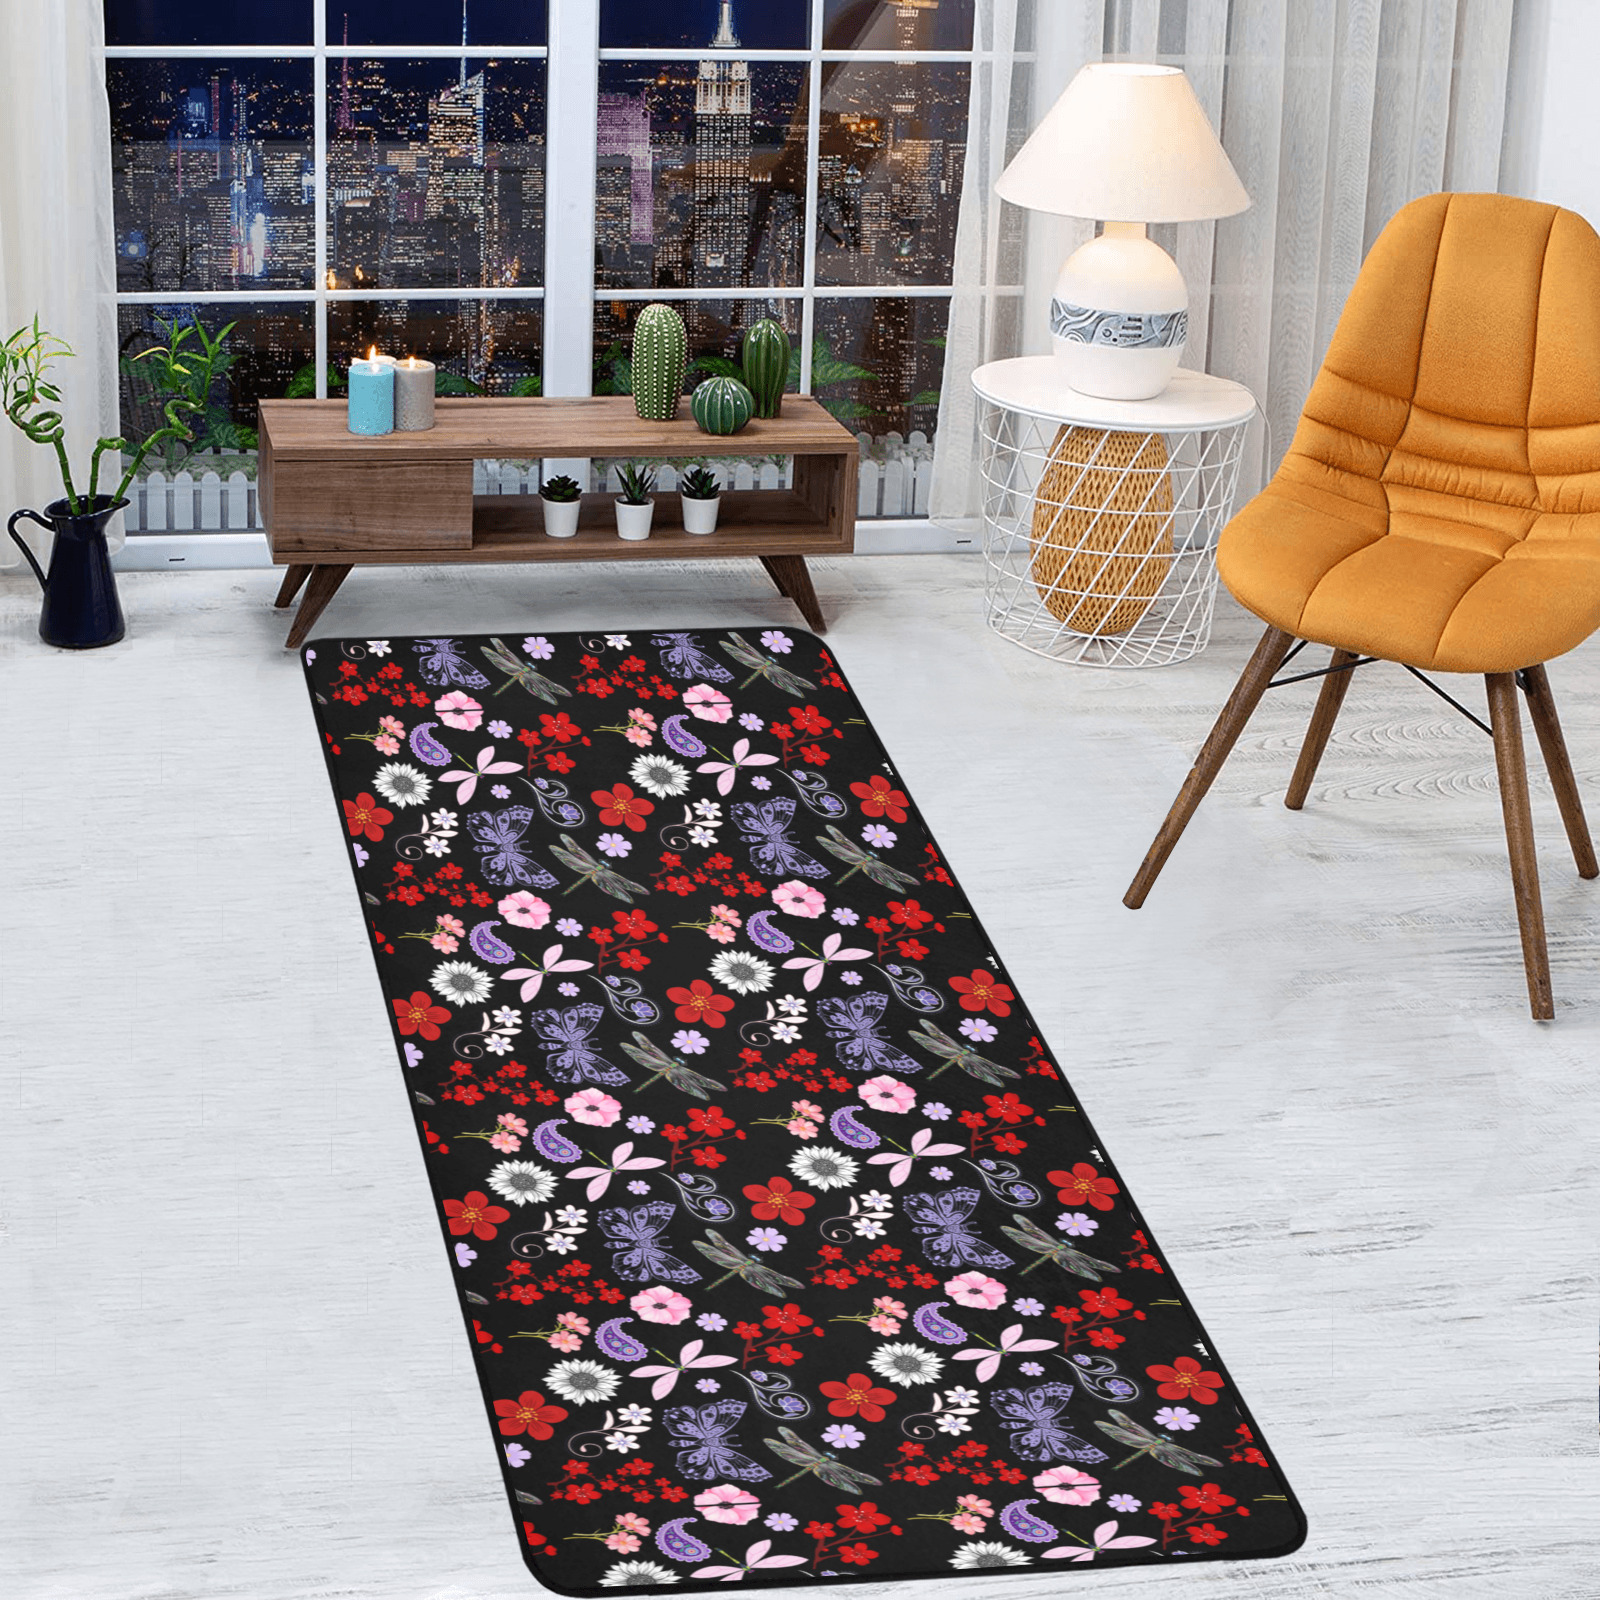 Black, Red, Pink, Purple, Dragonflies, Butterfly and Flowers Design Area Rug with Black Binding  7'x3'3''